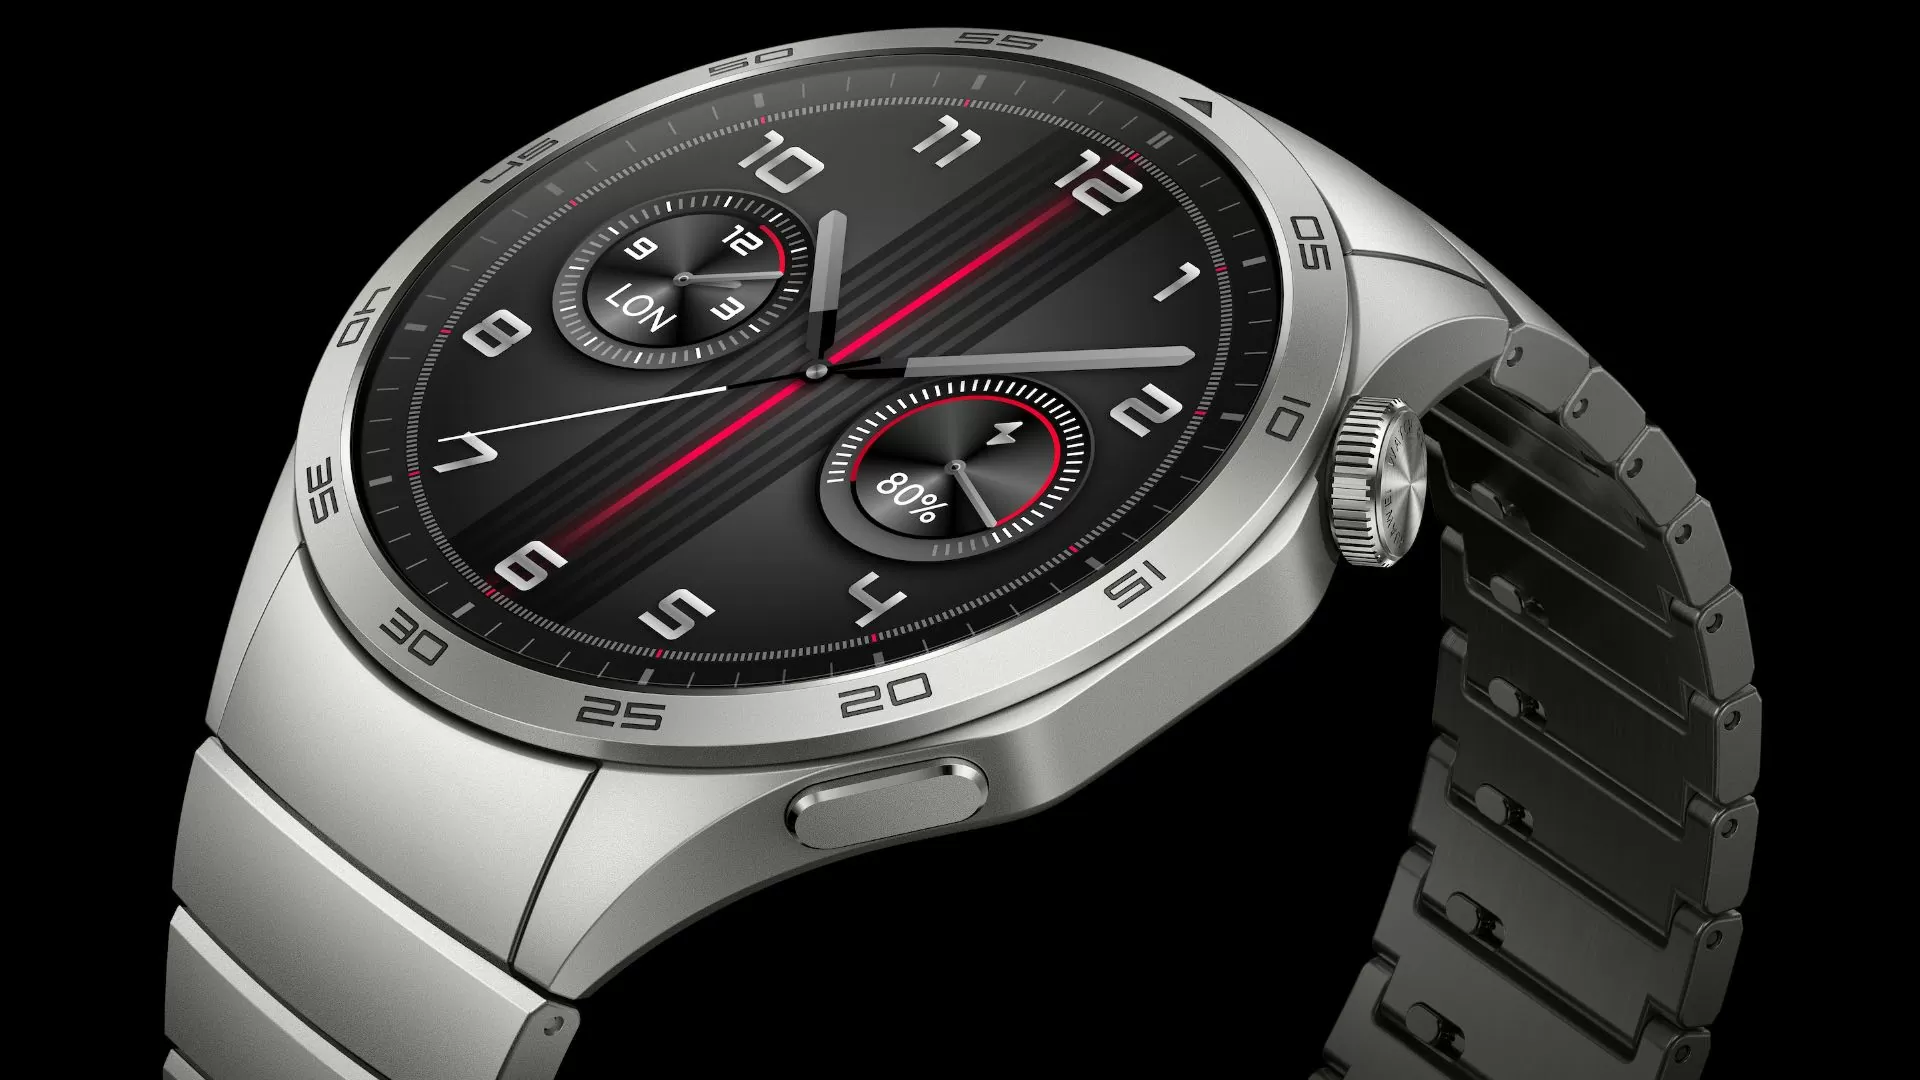 Huawei Watch GT 4: full features